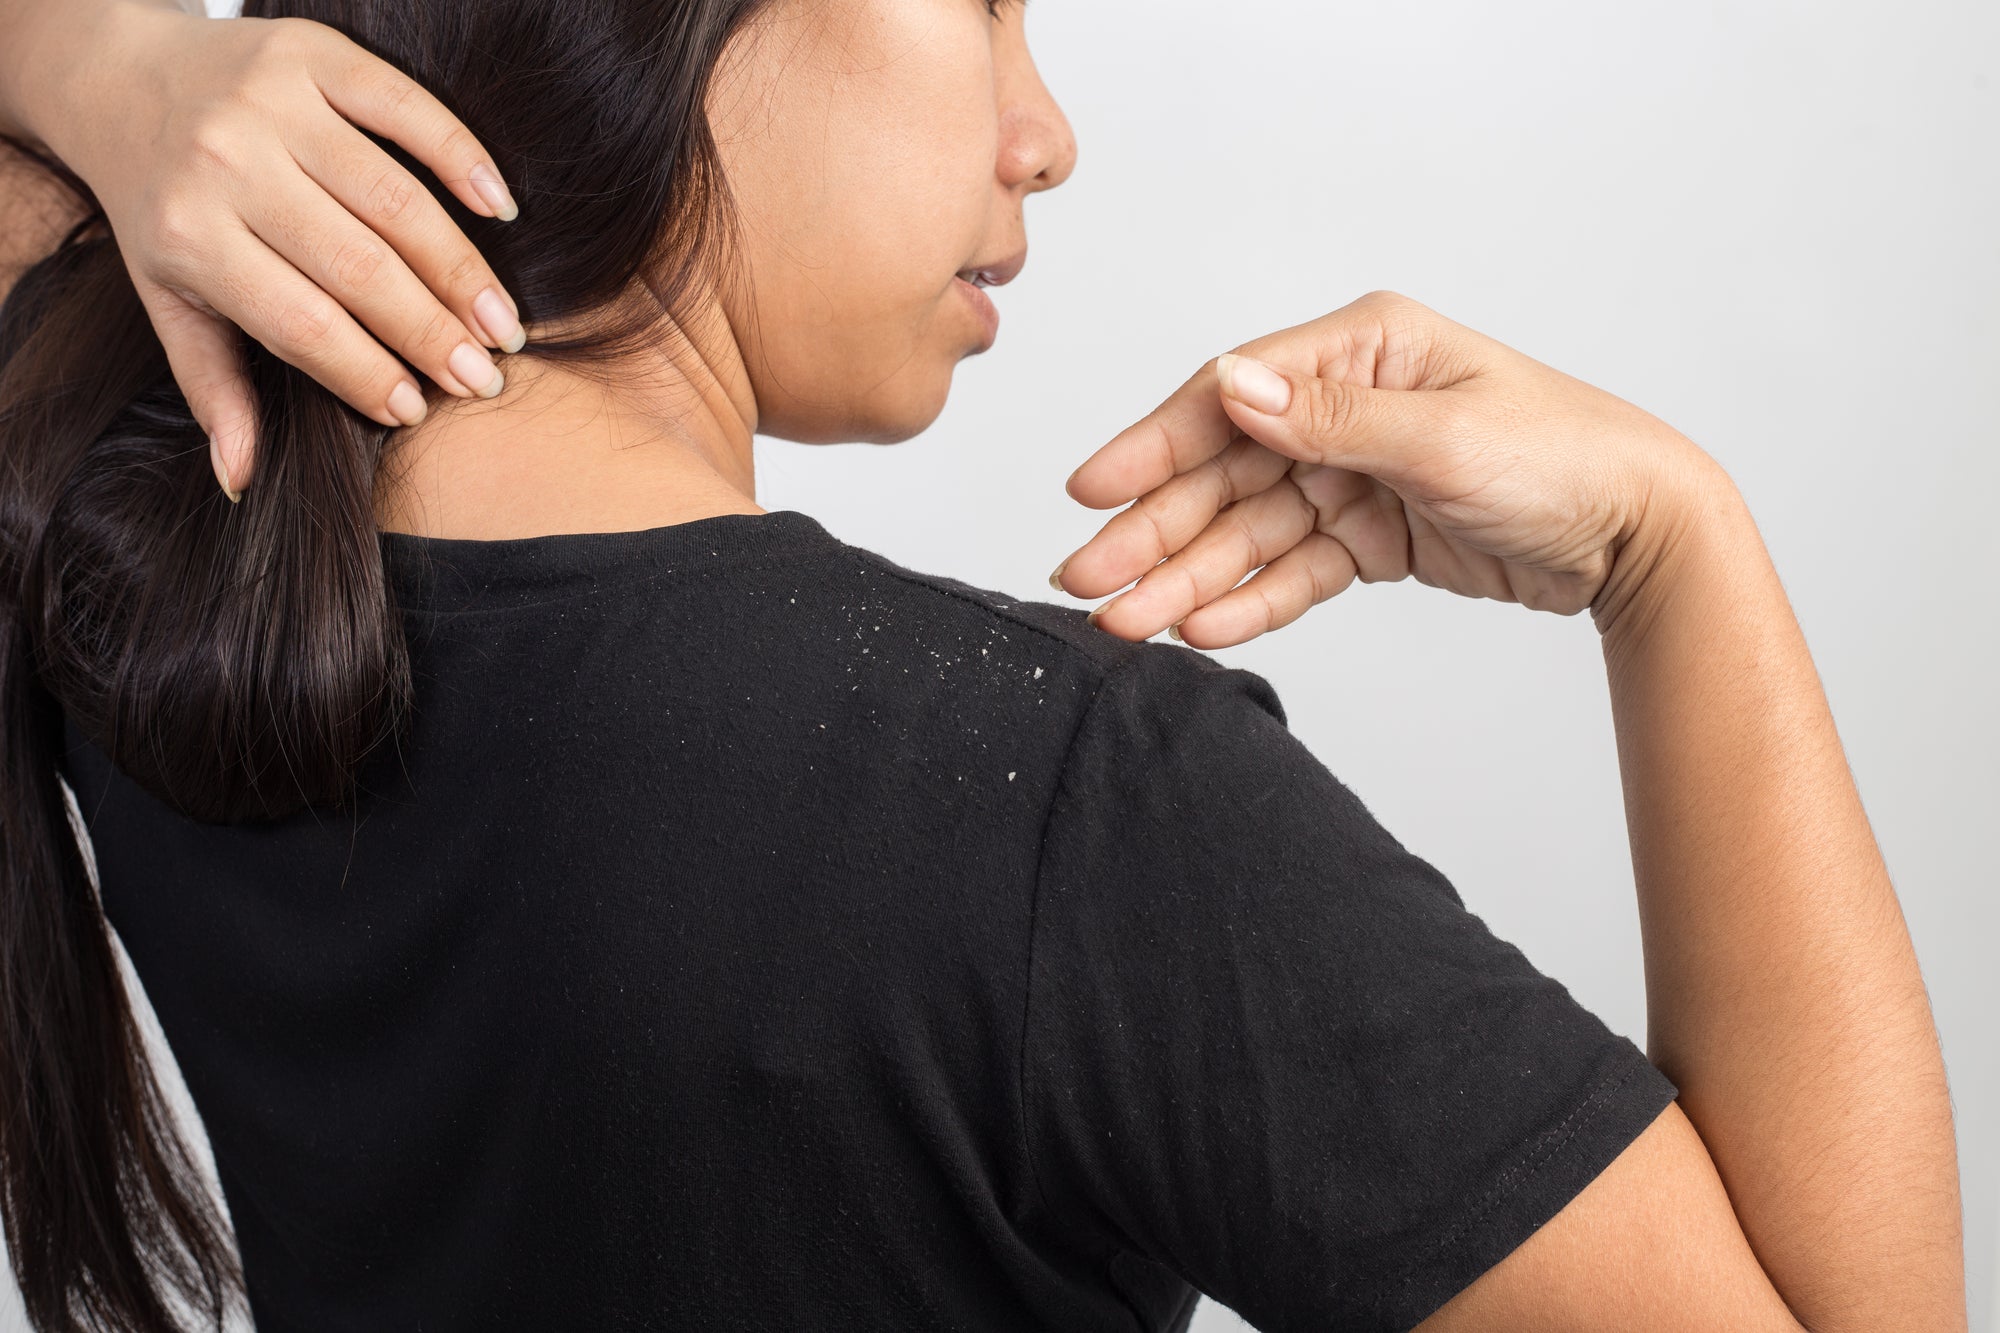 How to get rid of dandruff and retrieve your healthy hair